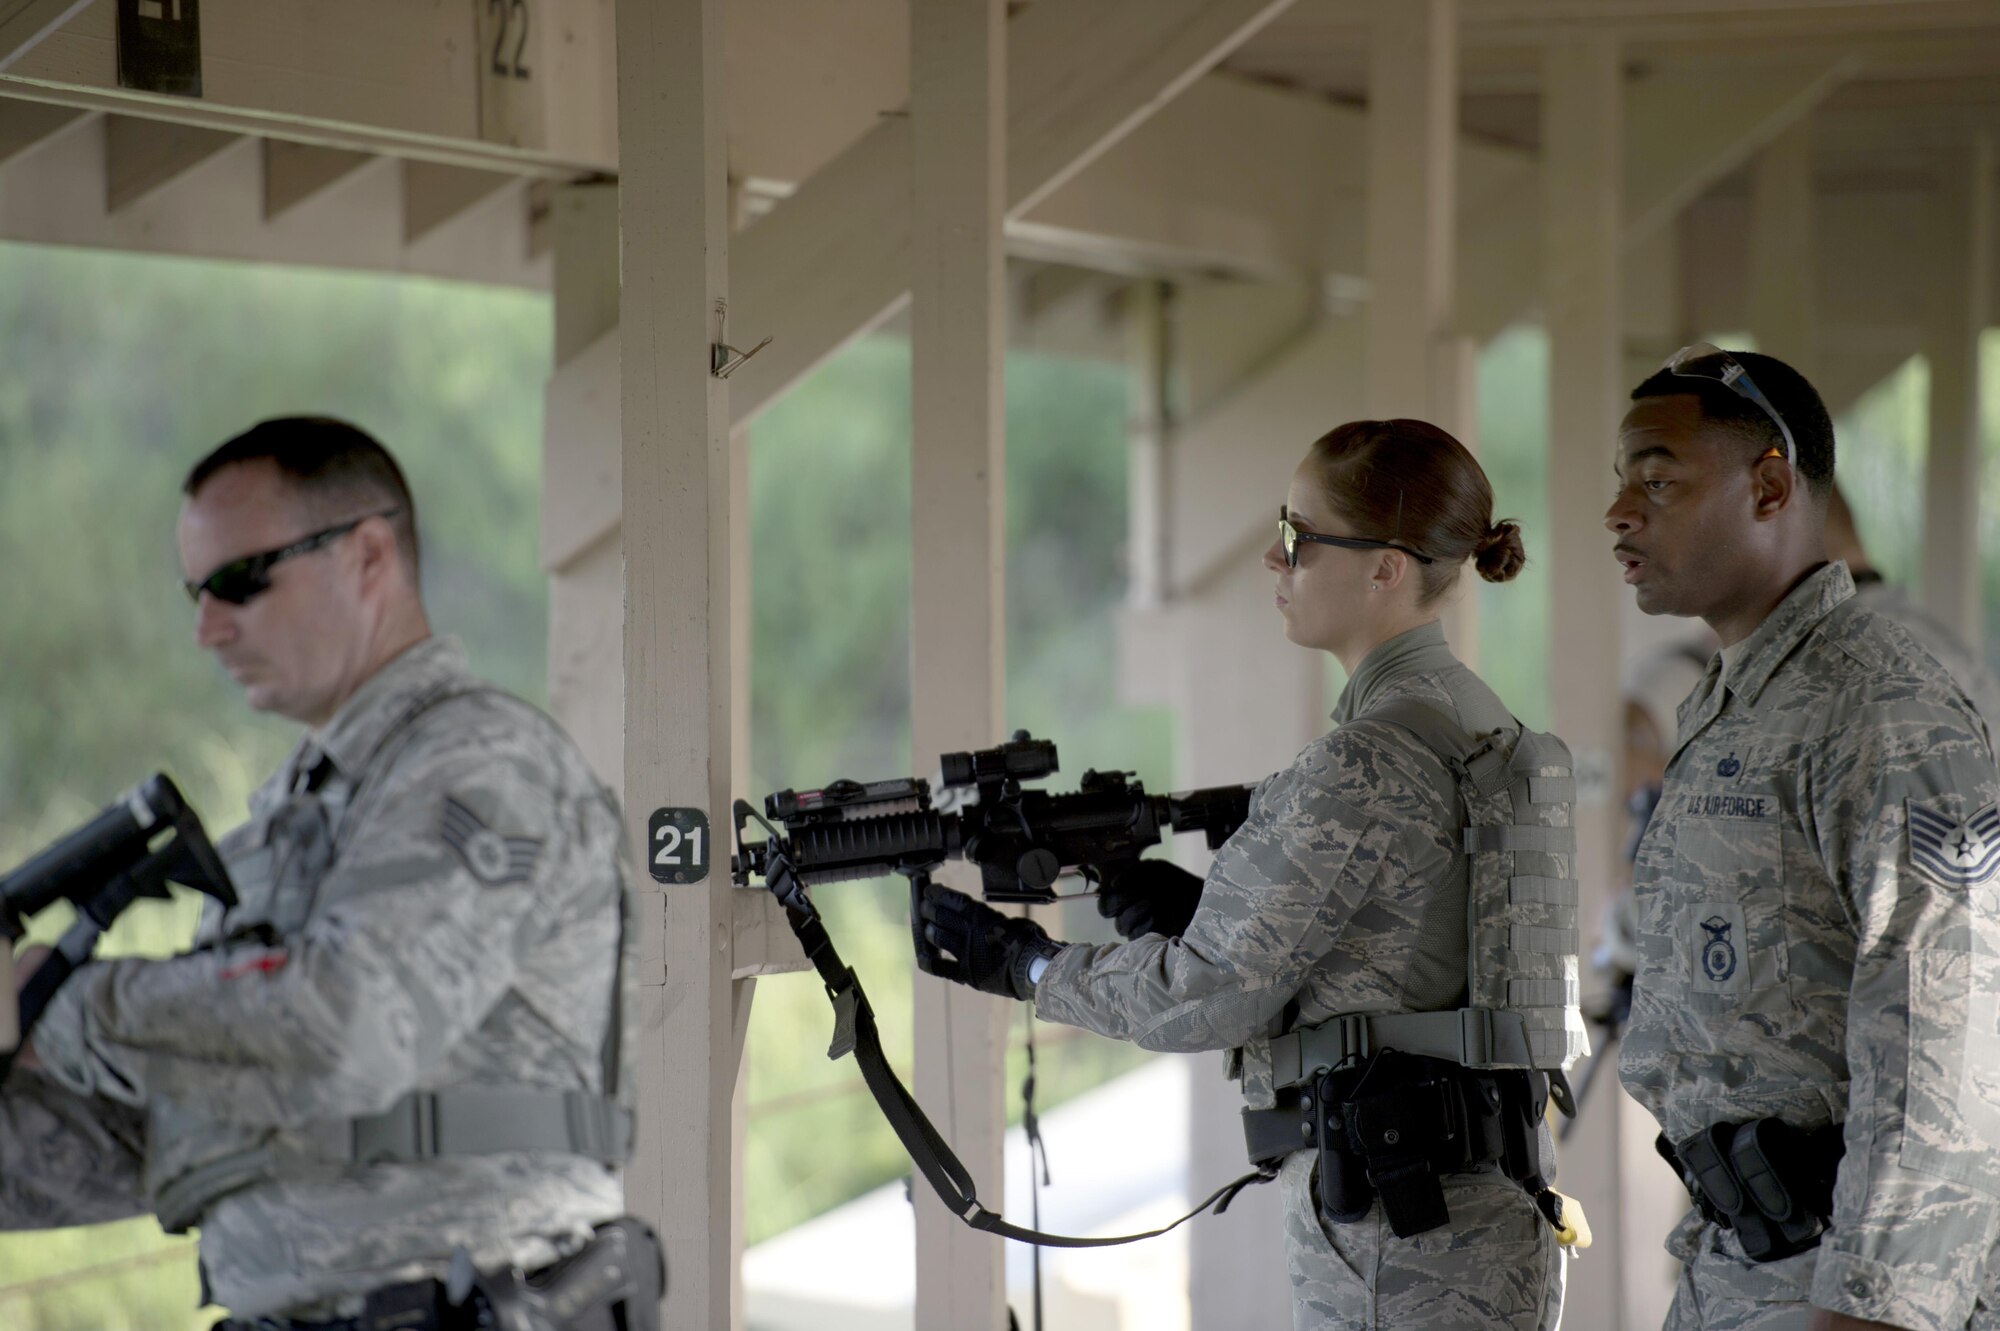 U.S. Air Force security forces members assigned to the 6th Security Forces Squadron participate in a dry run for a proficiency fire training exercise as an instructor watches, Aug. 16, 2017 at MacDill Air Force Base, Fla.